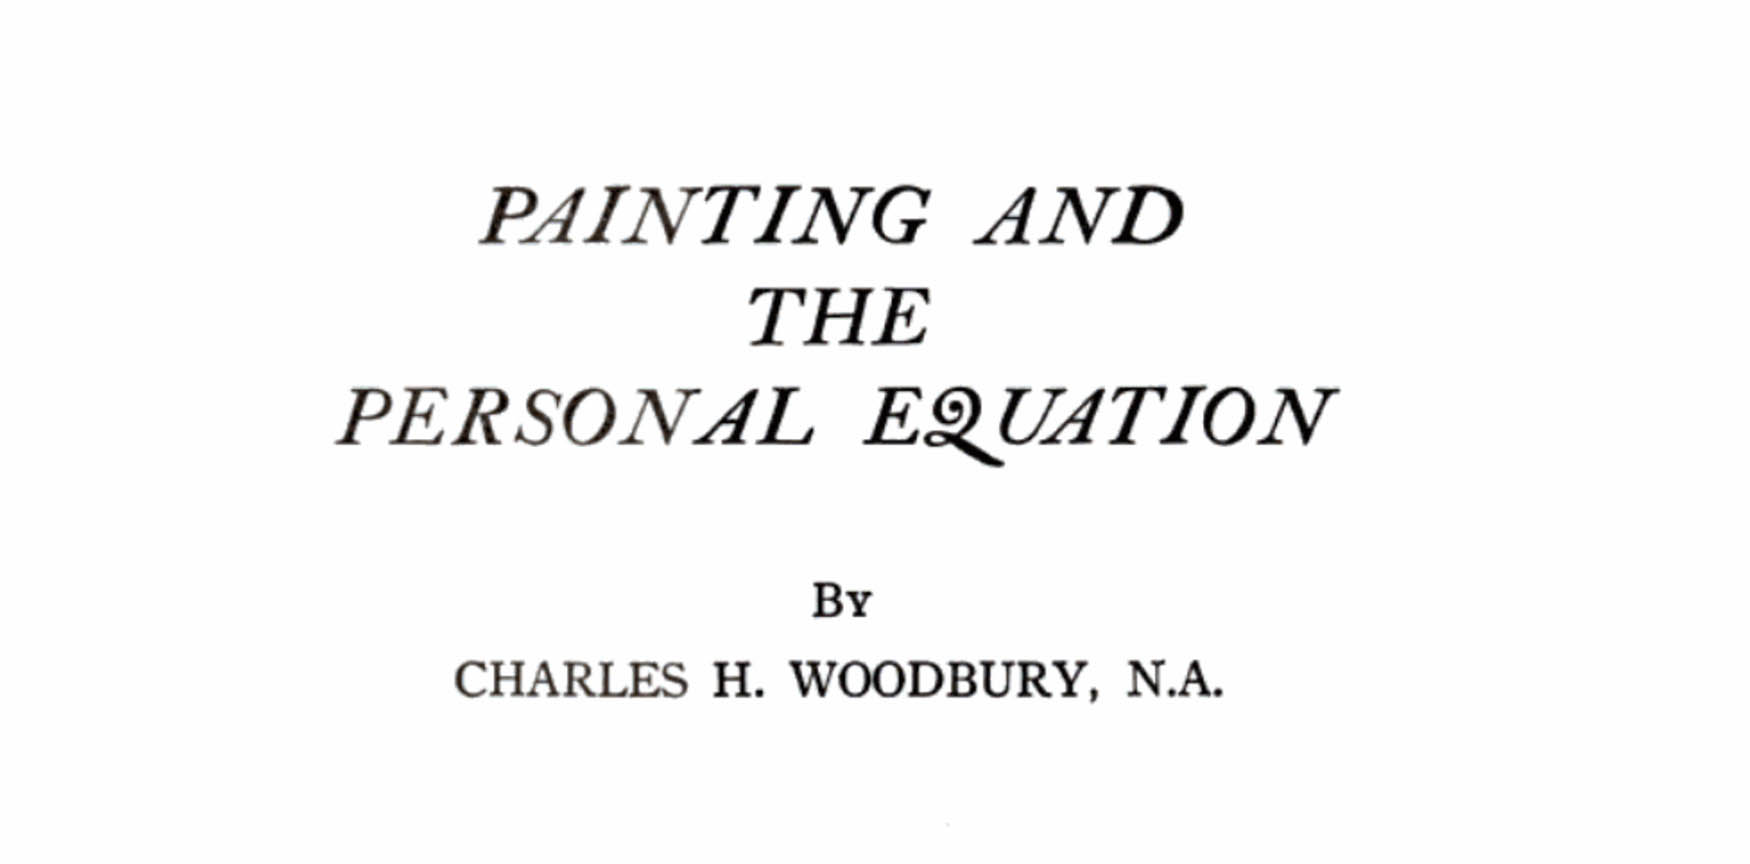 Title Page: Painting and the Personal Equation – Charles H Woodbury